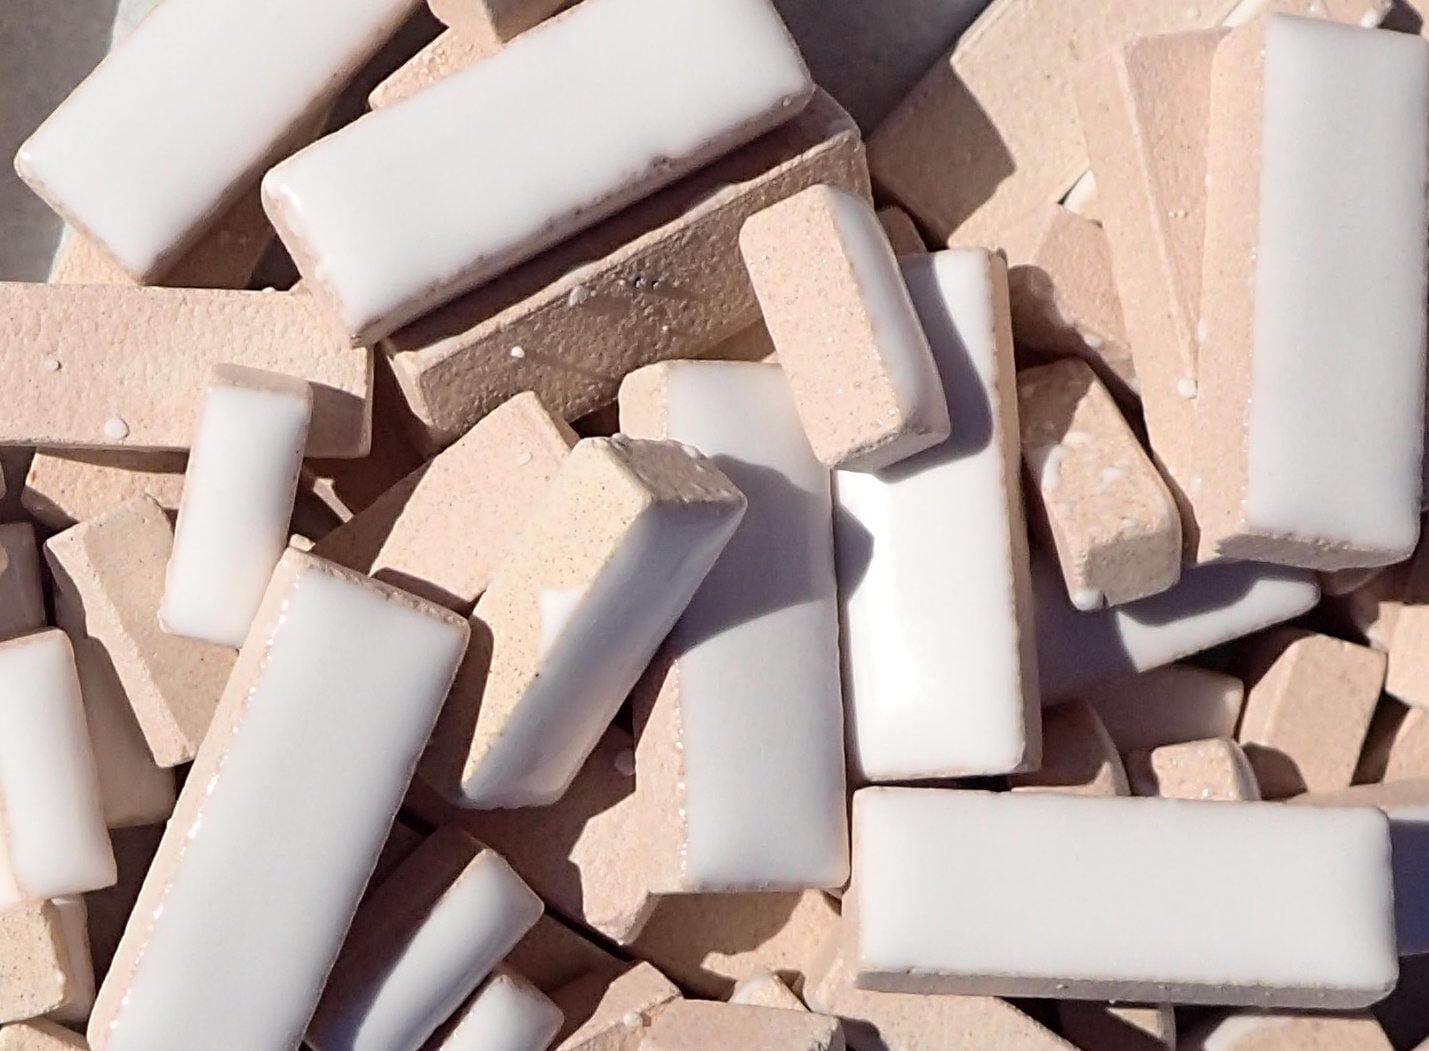 White Mini Rectangles Mosaic Tiles - 50g Ceramic in Mix of 3 Sizes 3/8" and 5/8" and 3/4"